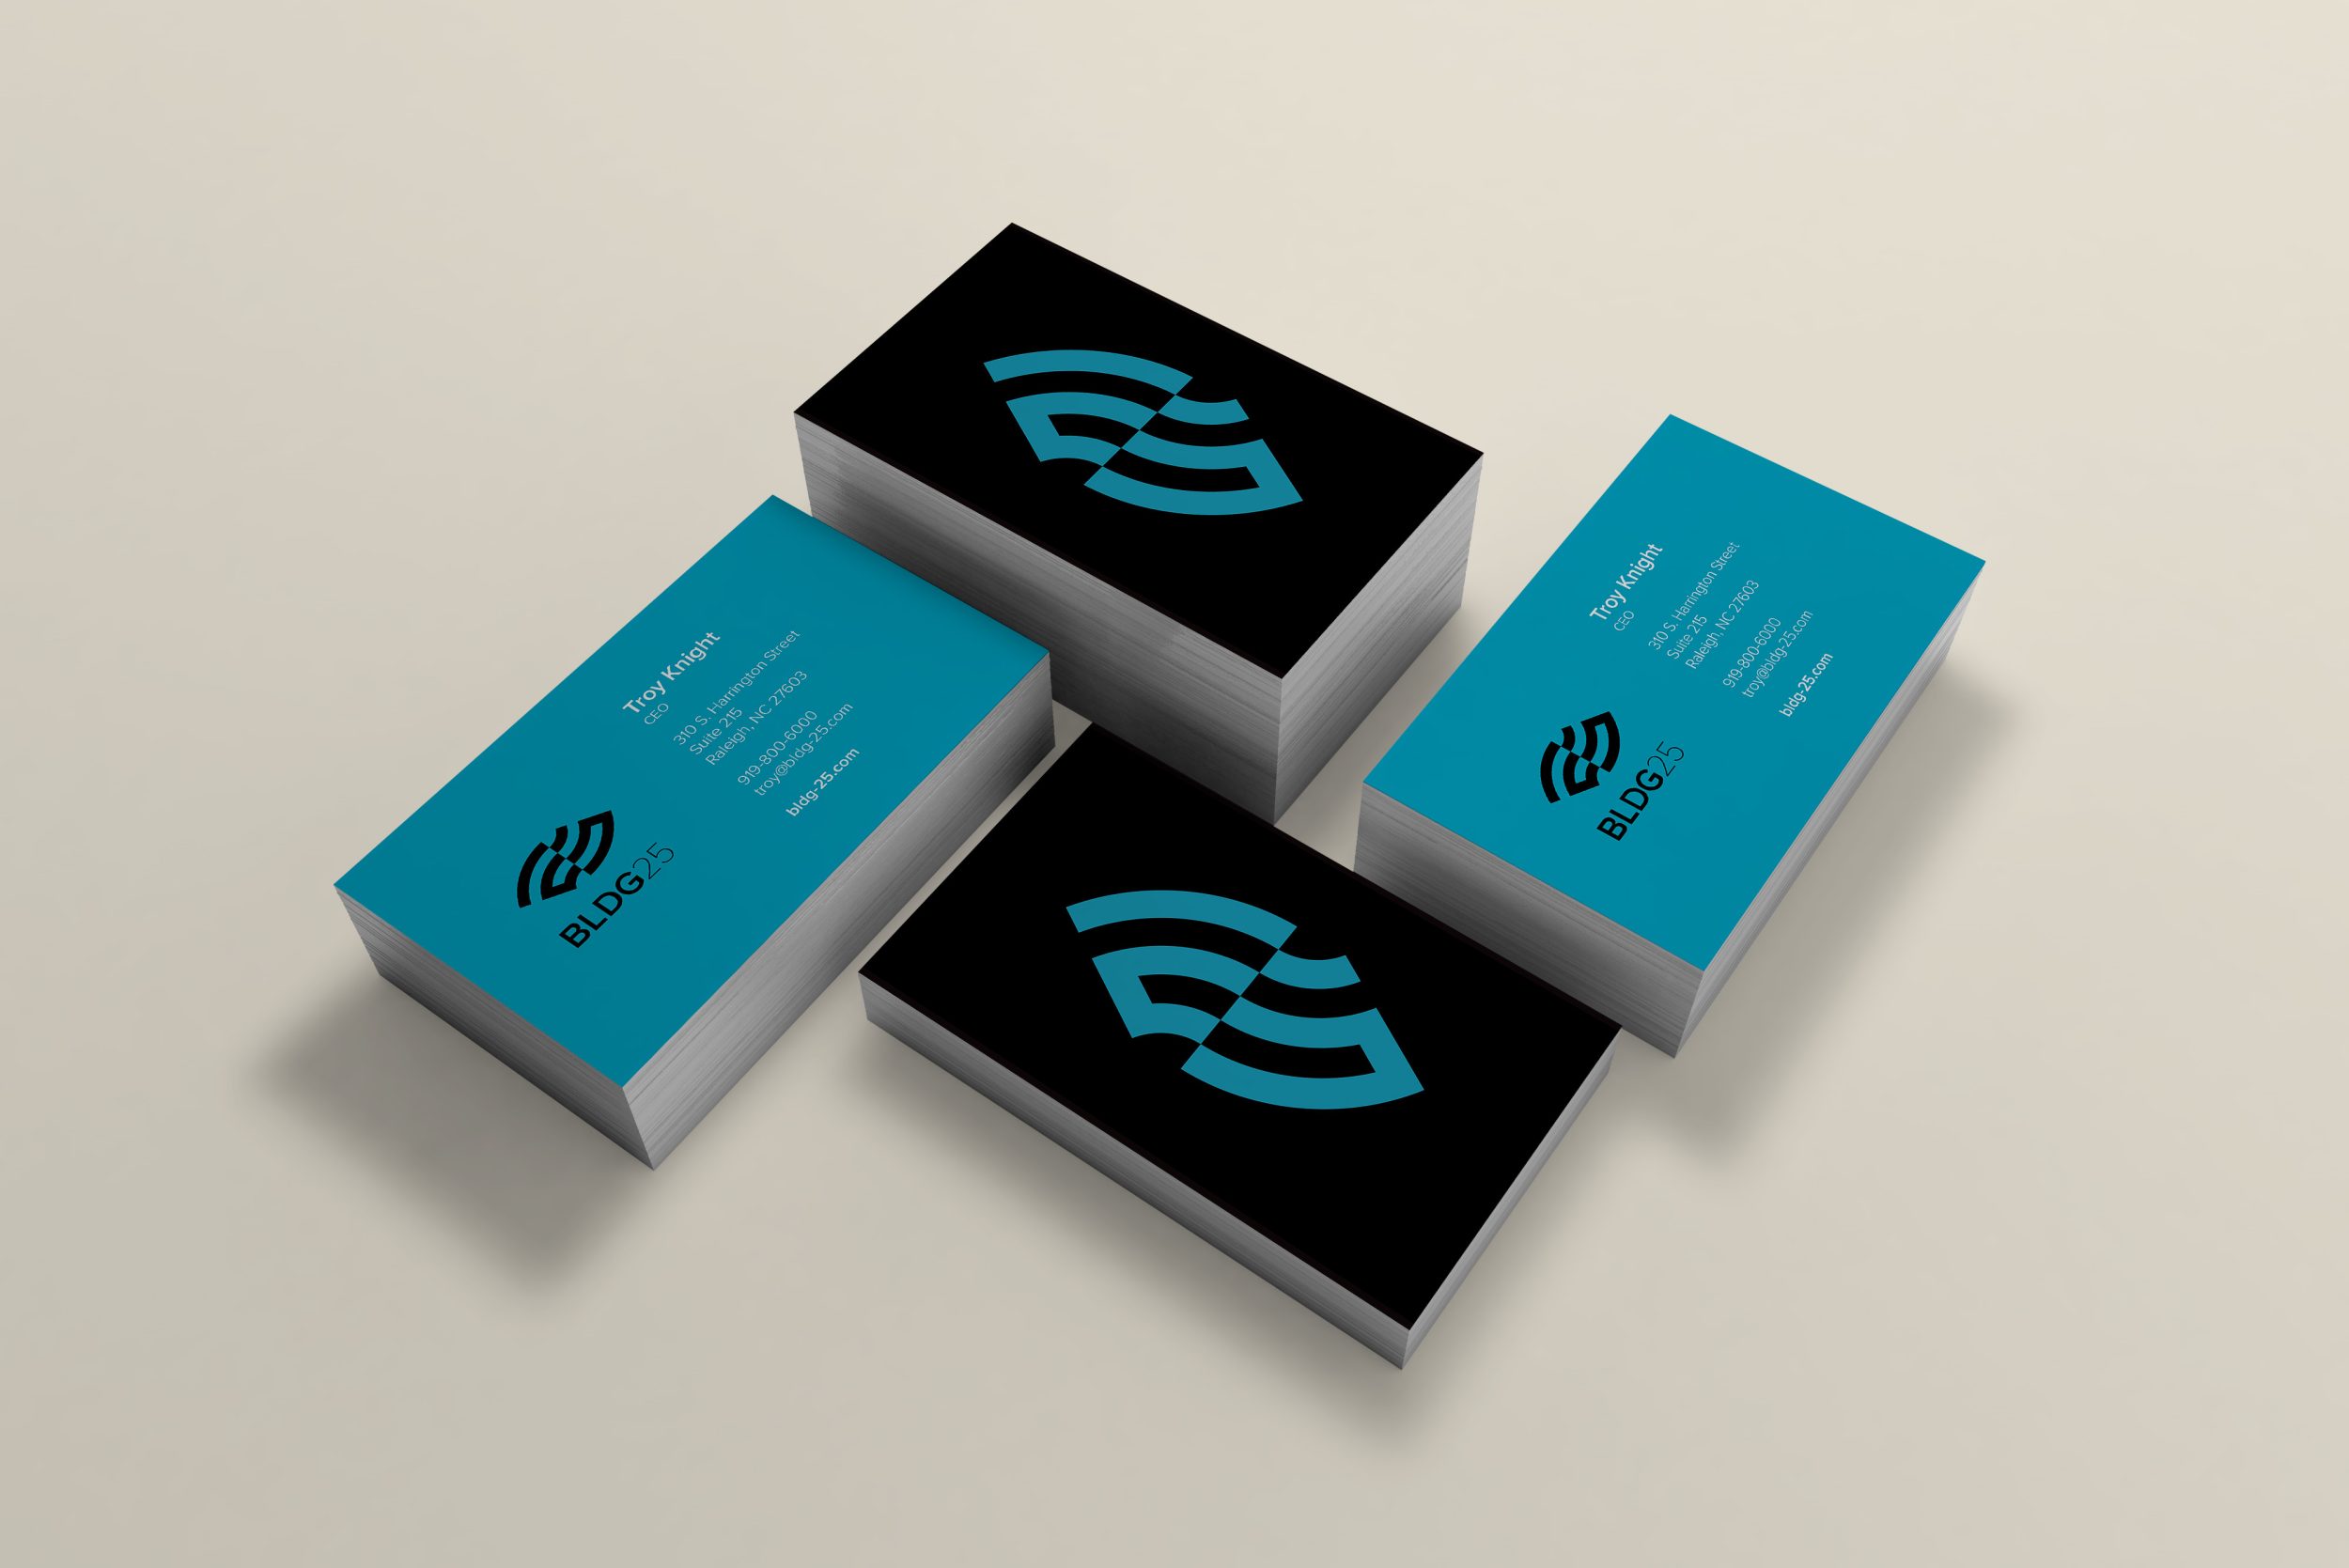 stack of business cards with bldg25 logo on front in aqua on black with an aqua back